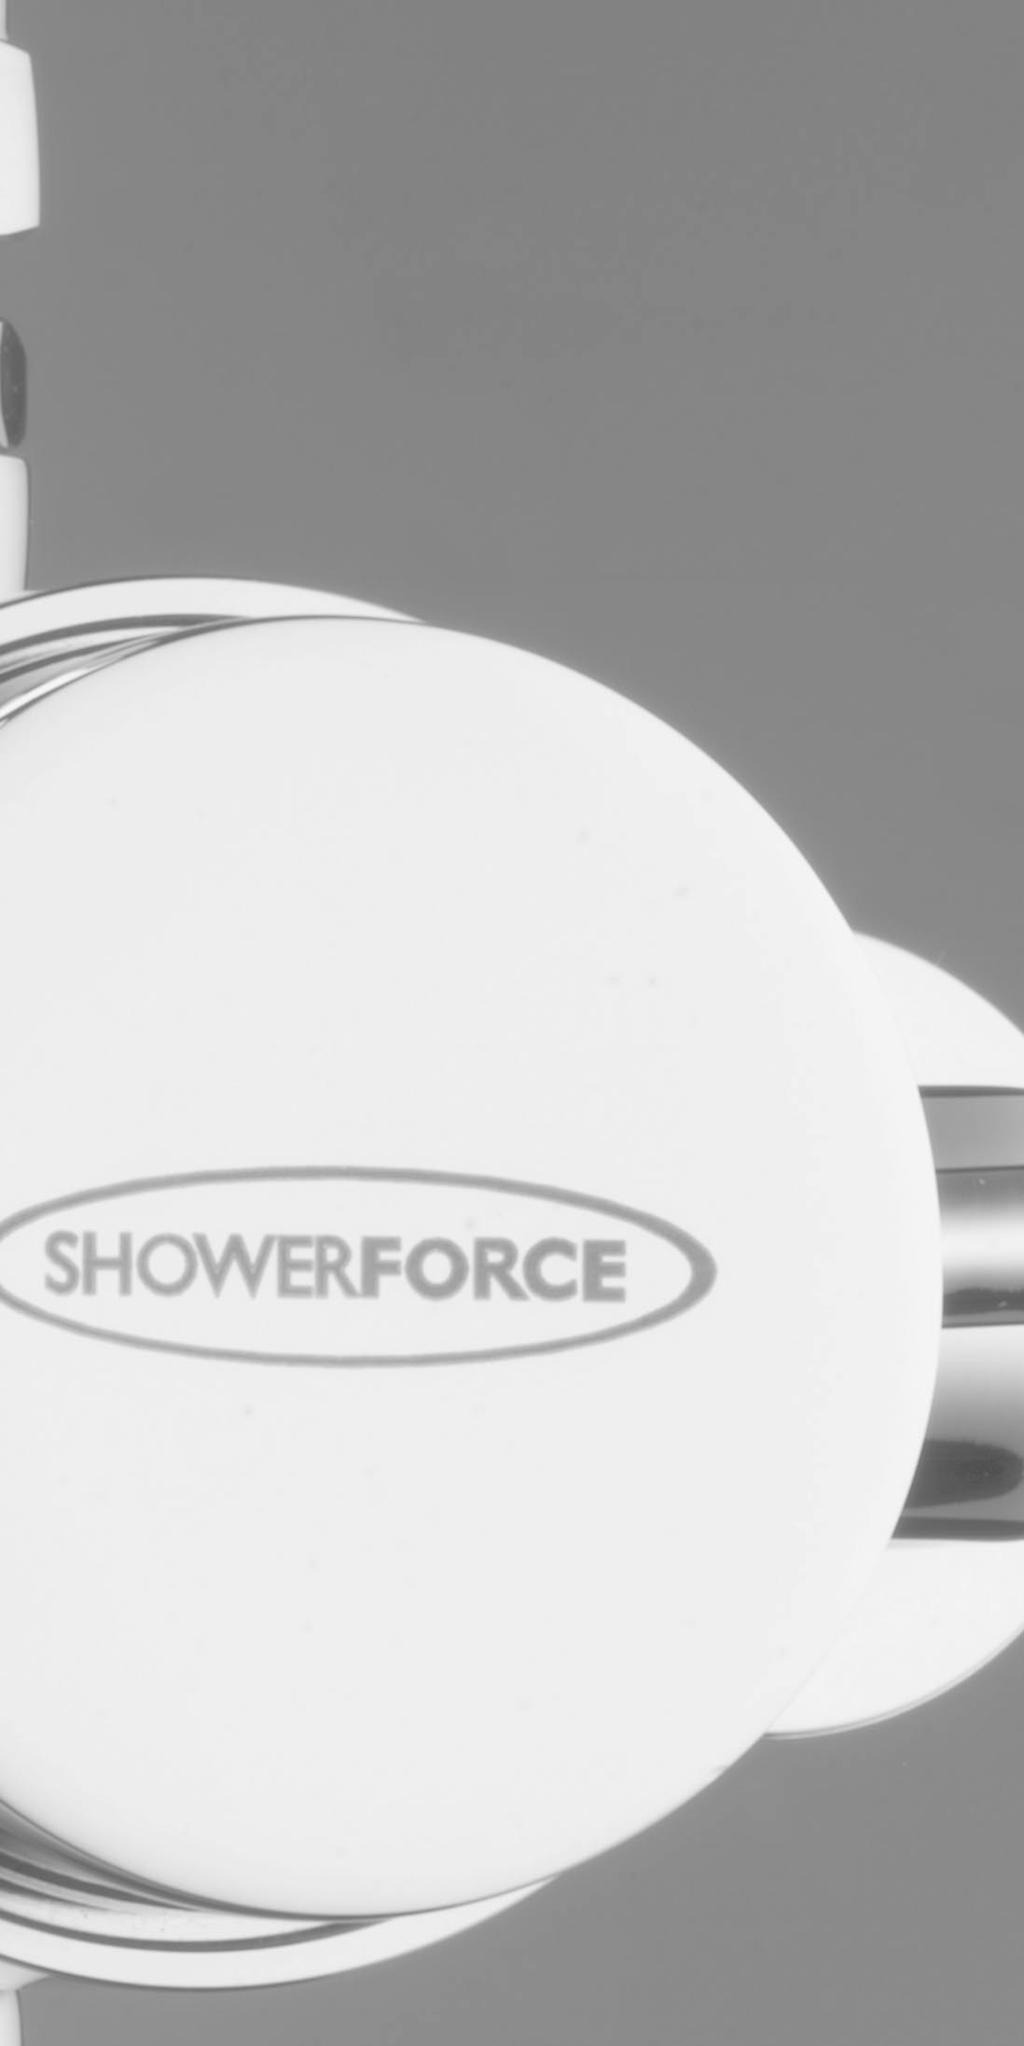 Guarantee GUARANTEECARD Please post immediately enclosing a copy of proof of purchase FOR SHOWERFORCE USE ShowerForce 970/971/972-T Mixer Showers Proof of purchase enclosed YES NO AFFIX PRODUCT LABEL